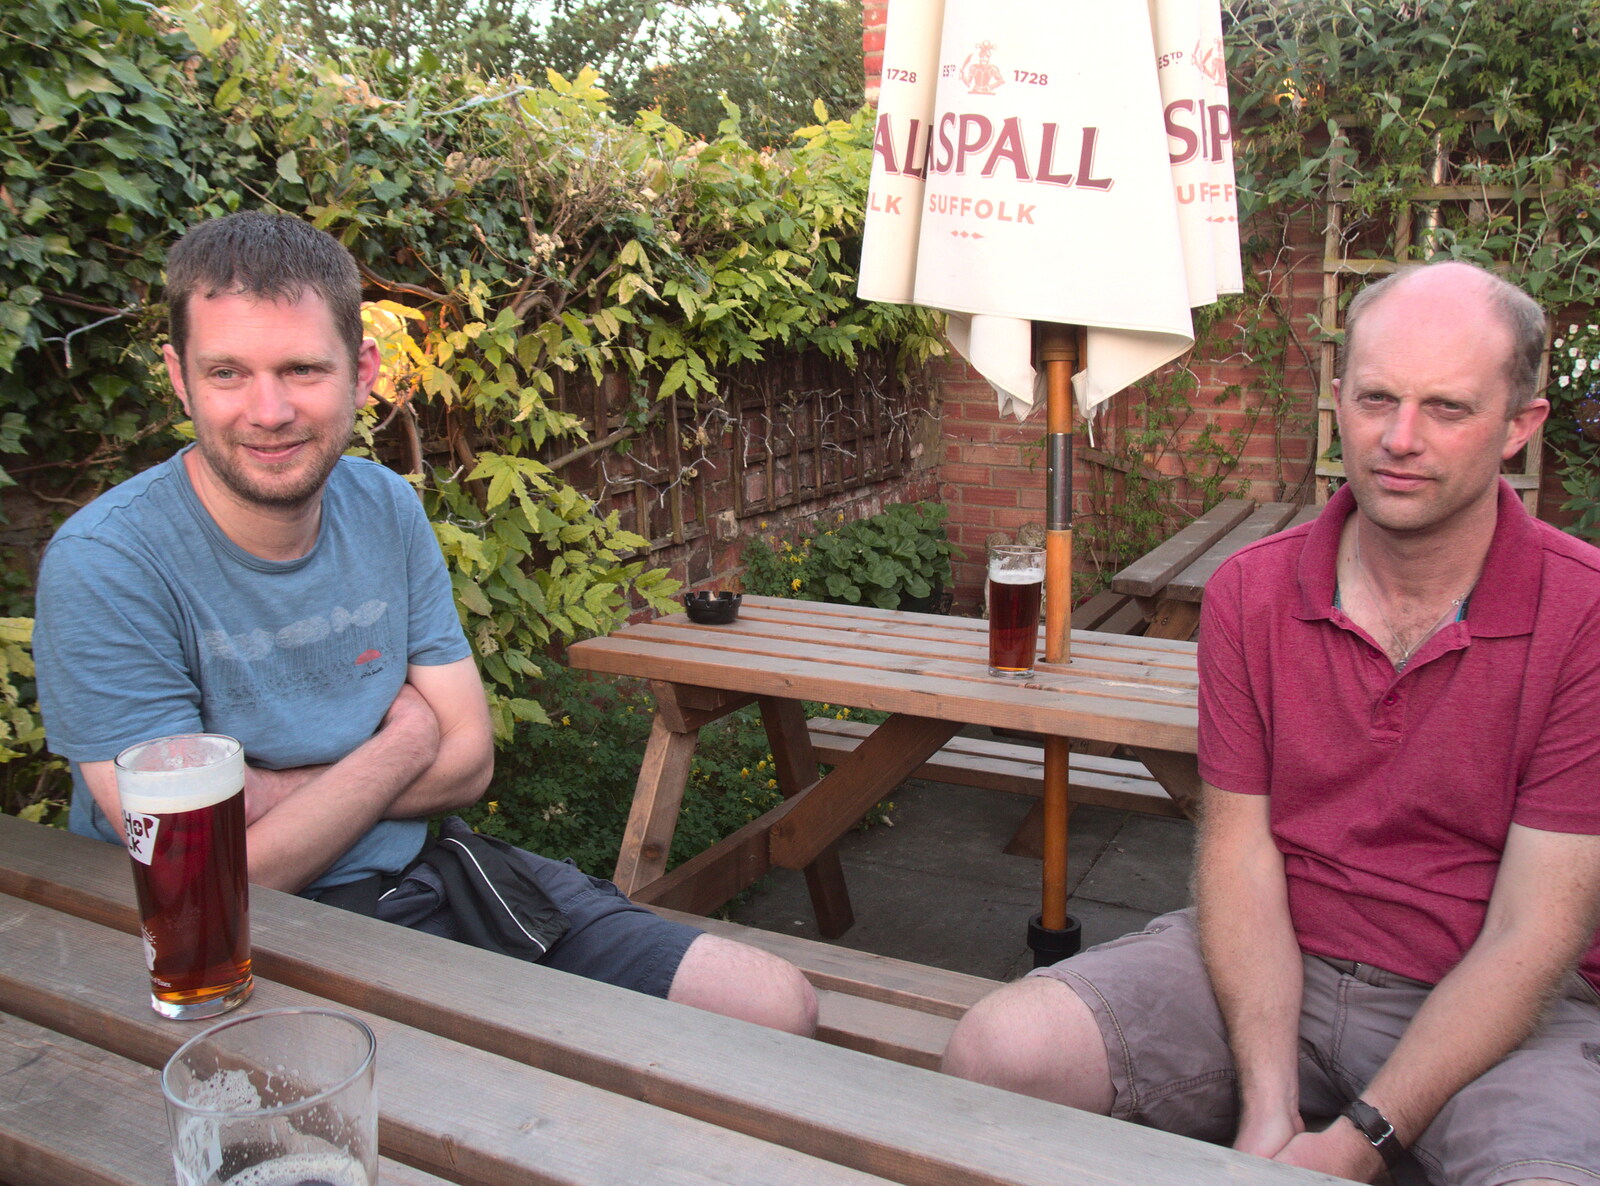 The BSCC at the Woolpack, Debenham, Suffolk - 14th June 2018: The Boy Phil and Paul in the beer garden